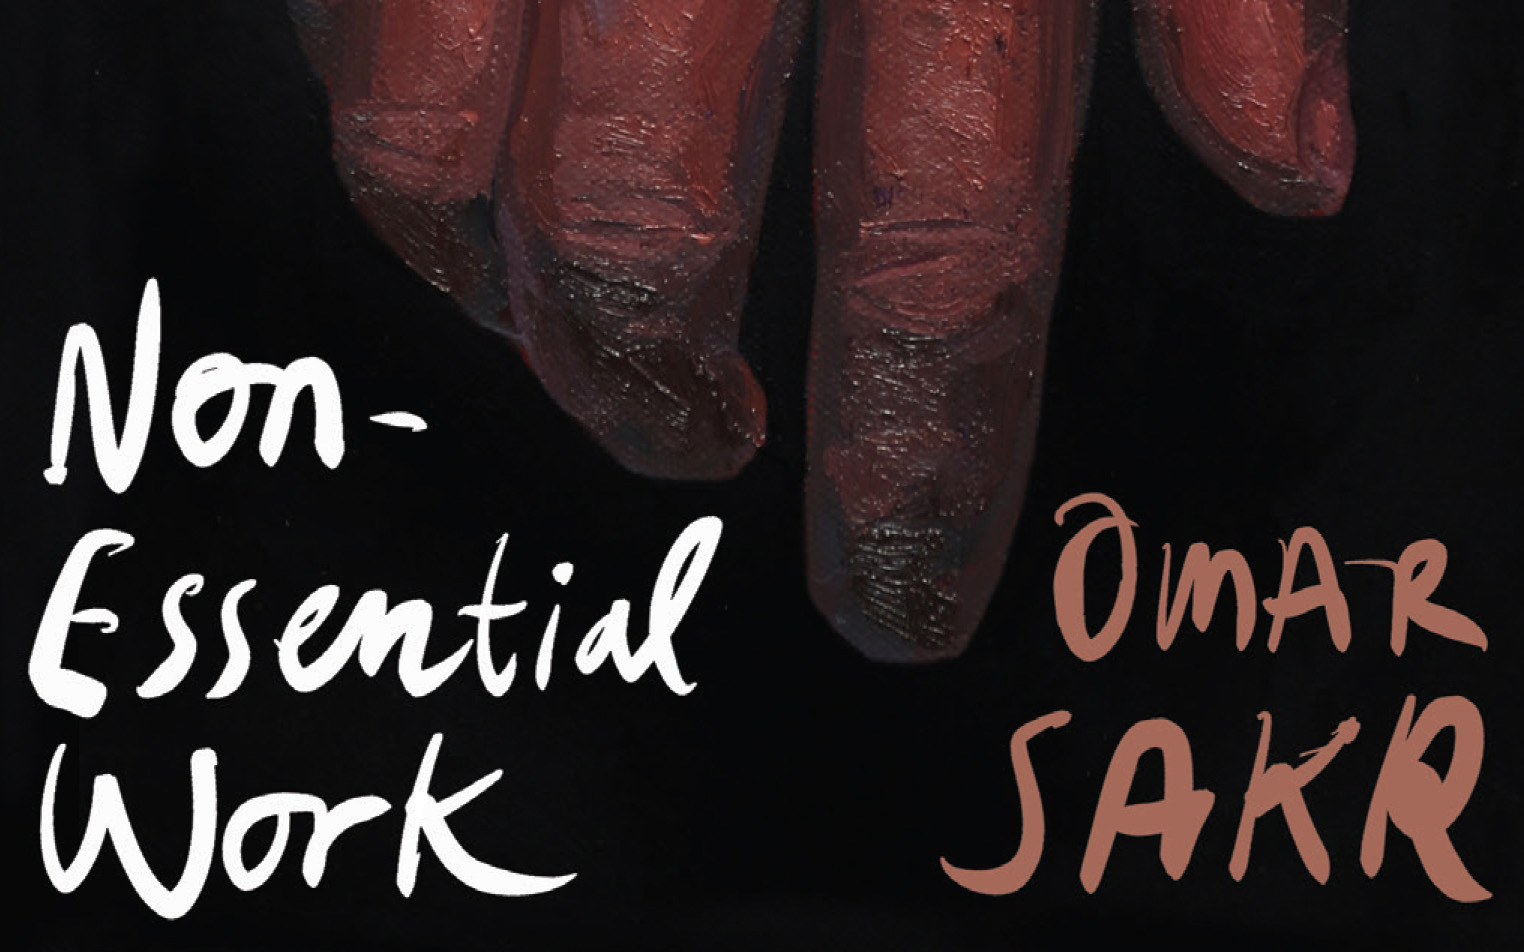 Mike Ladd reviews ‘Non-Essential Work’ by Omar Sakr